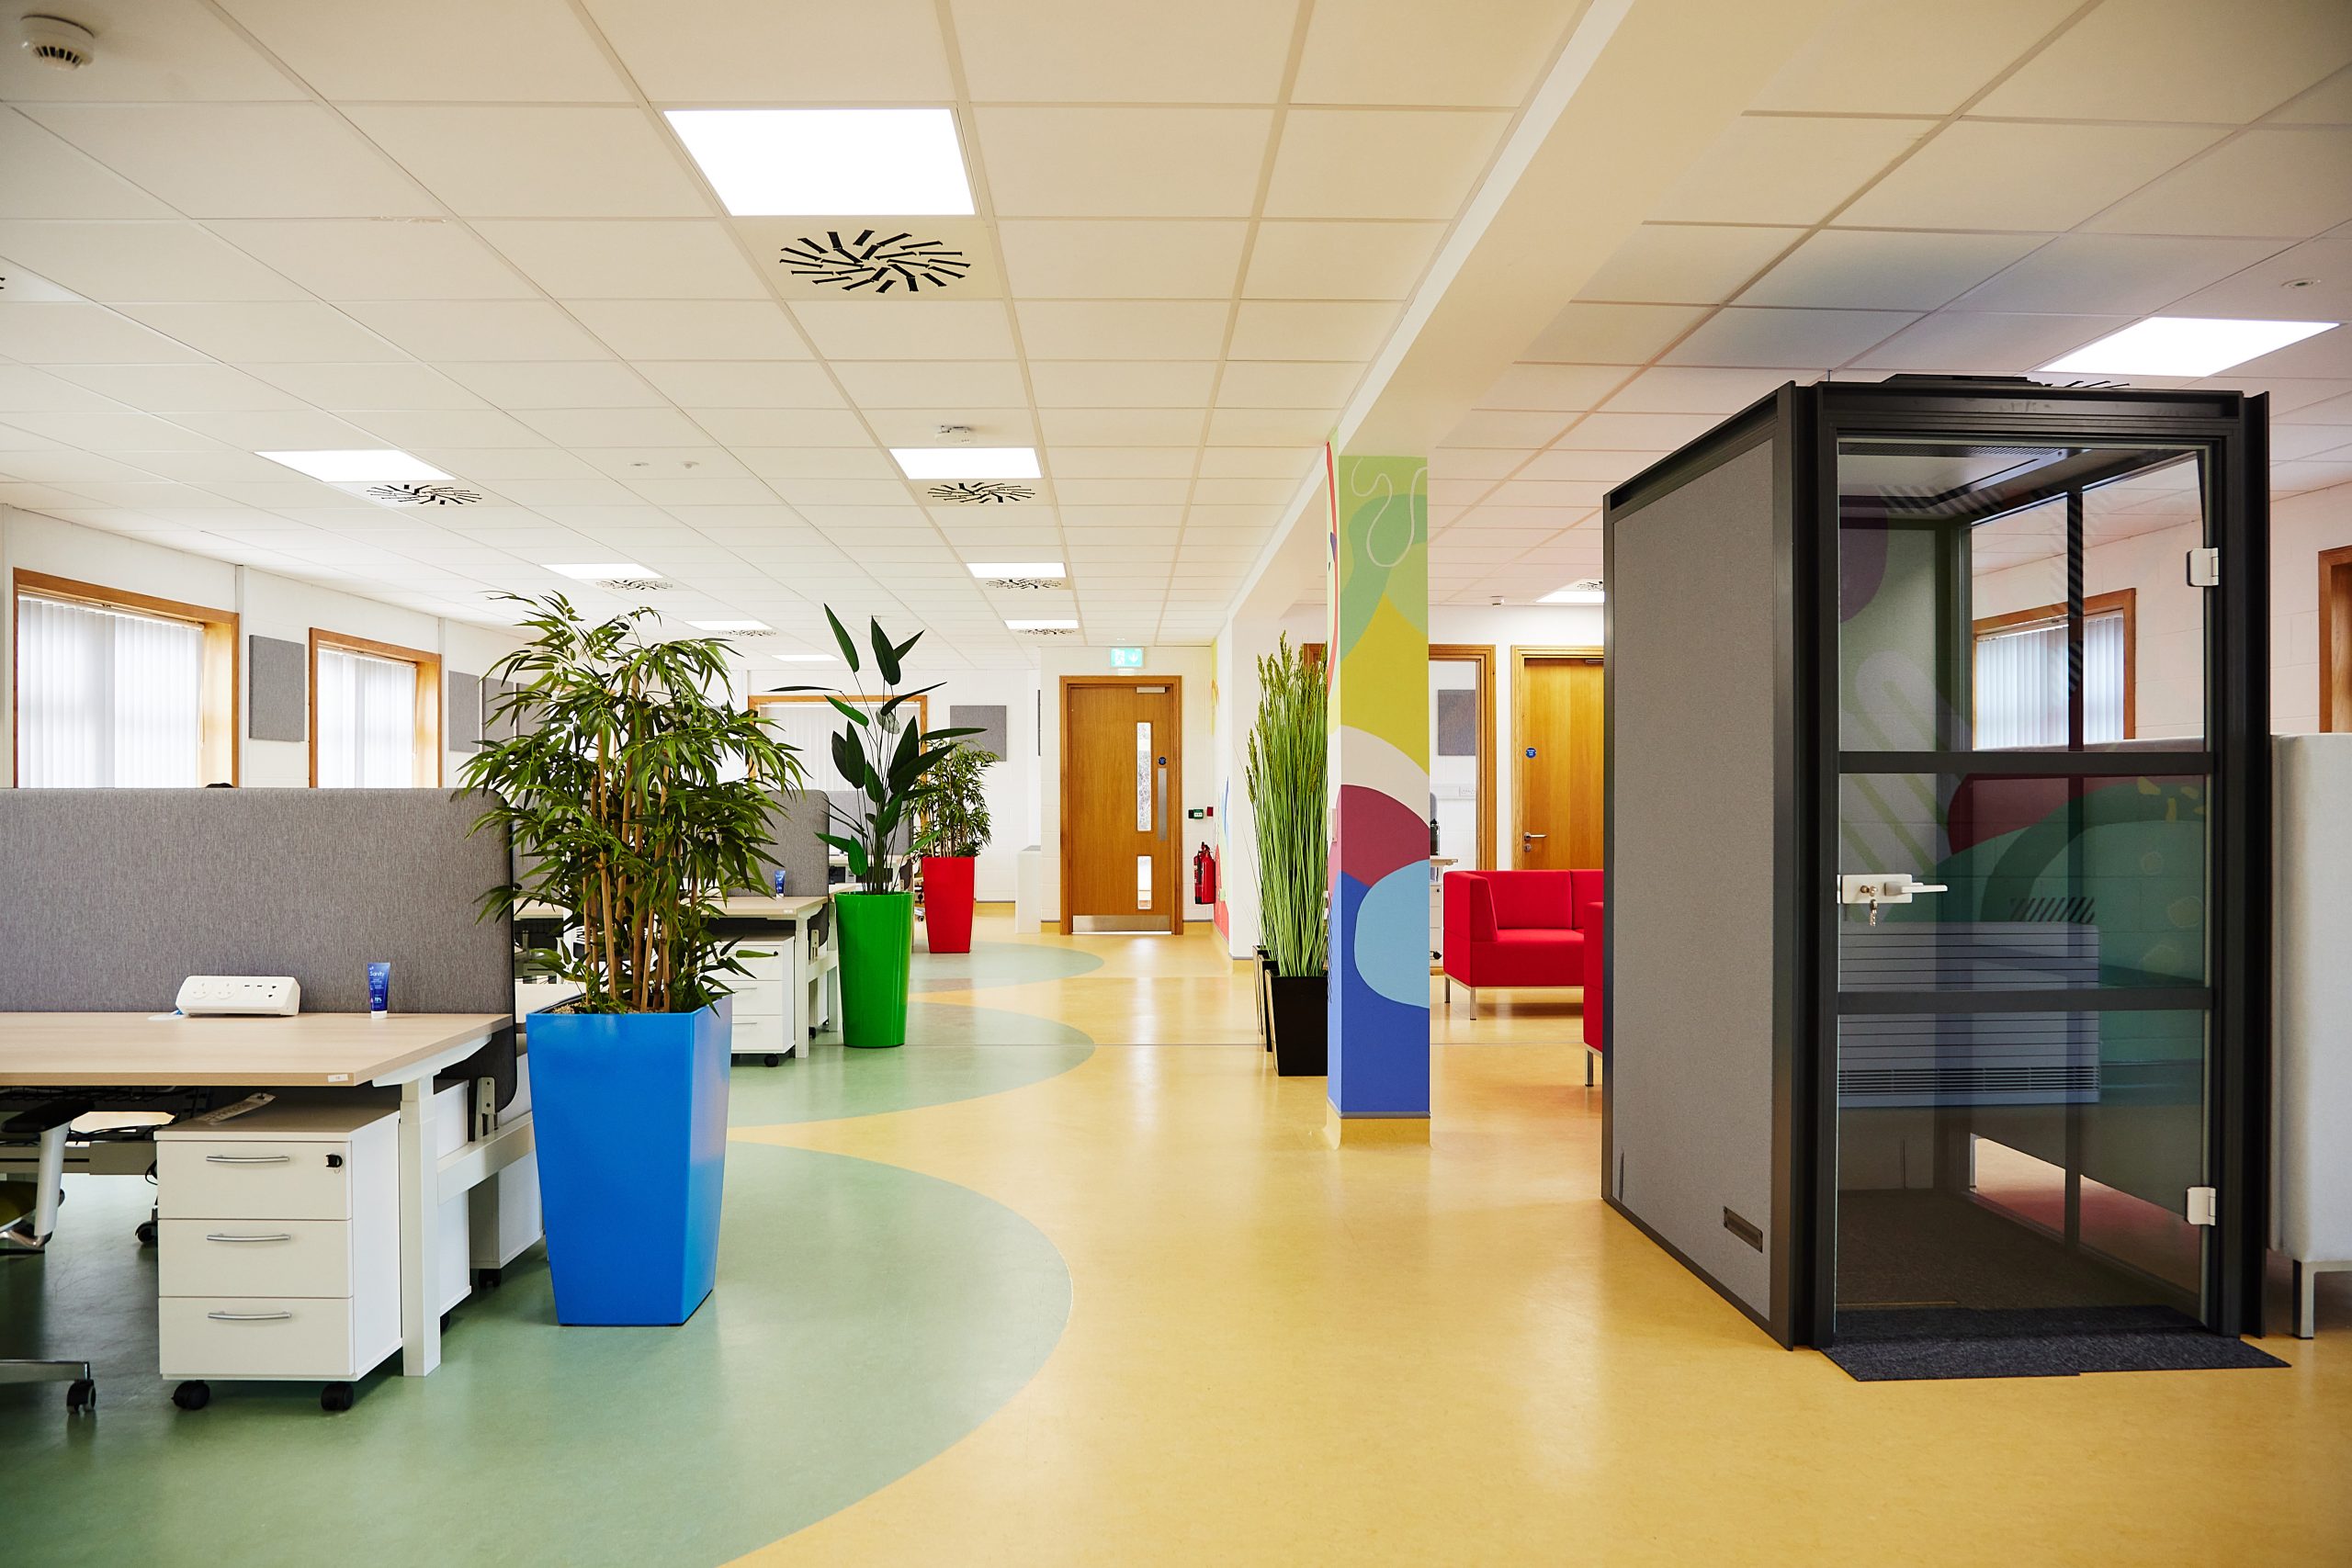 11A bright spacious room, with a bank of desks to the left and a black phone booth and red couches to the left. Plants line the centre walkway along a green and yellow vinyl floor.